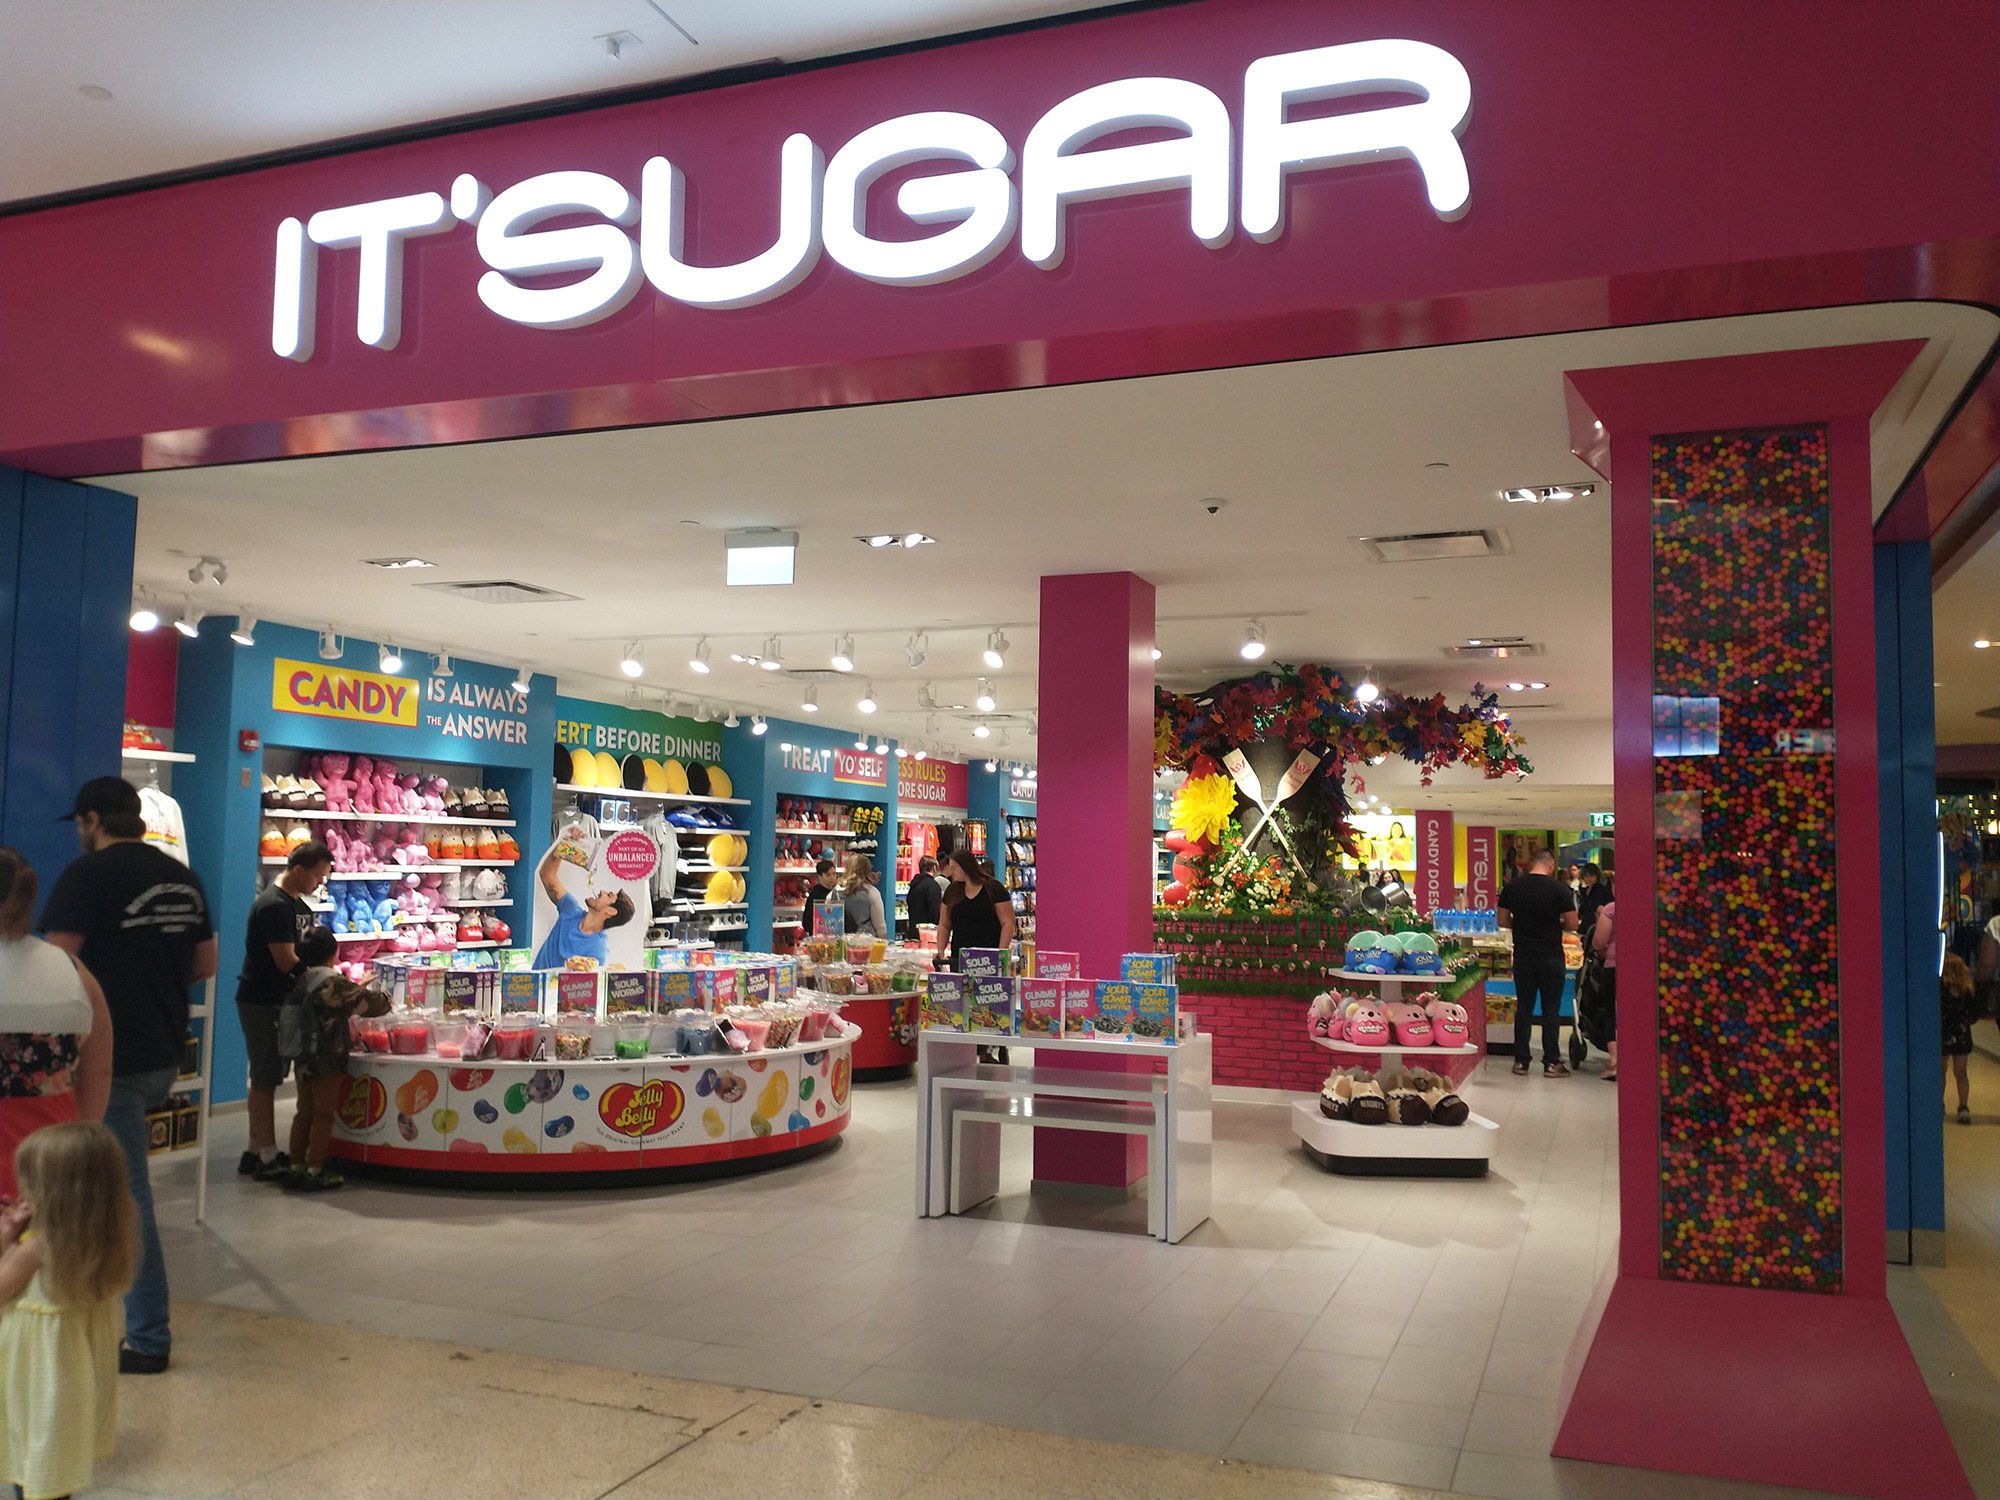 One of several candy stores.